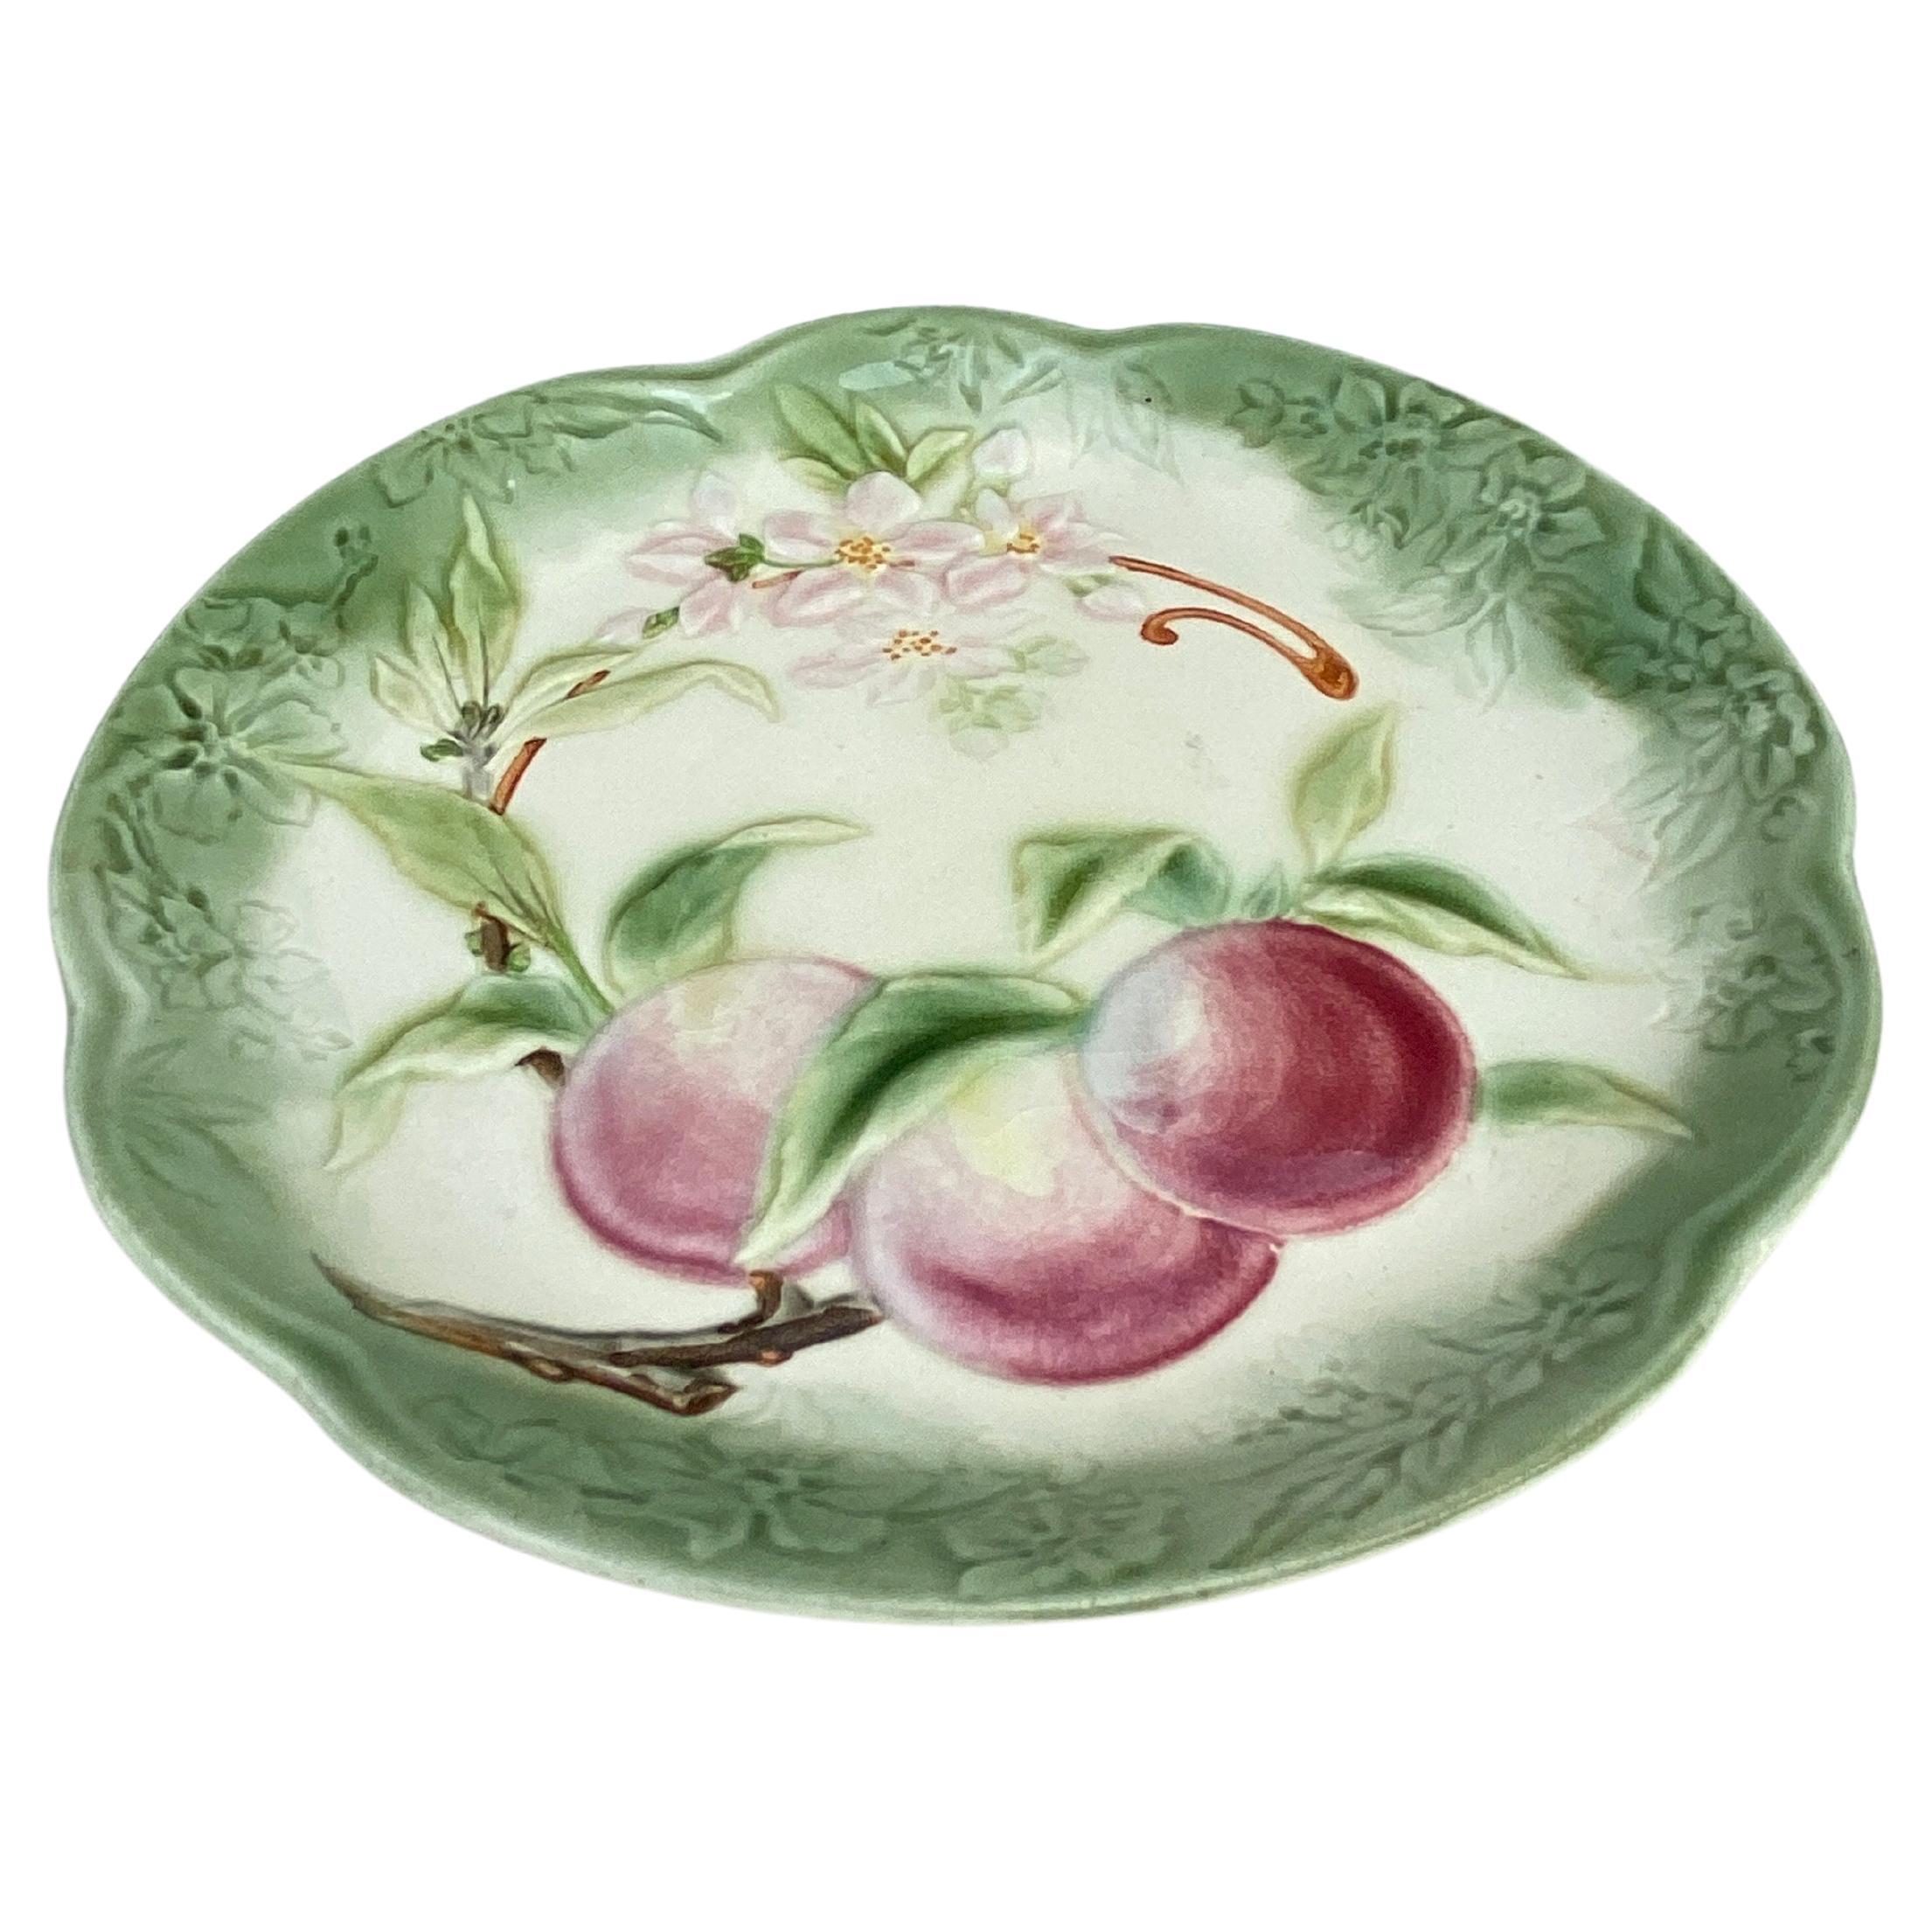 19th century Majolica Apples plate signed Choisy Le Roi.
Made for Higgins & Seiter New York.
The Higgins & Seiter Company of New York City began selling decorations for the table, including rich-cut glass in 1887. By 1891 the firm was